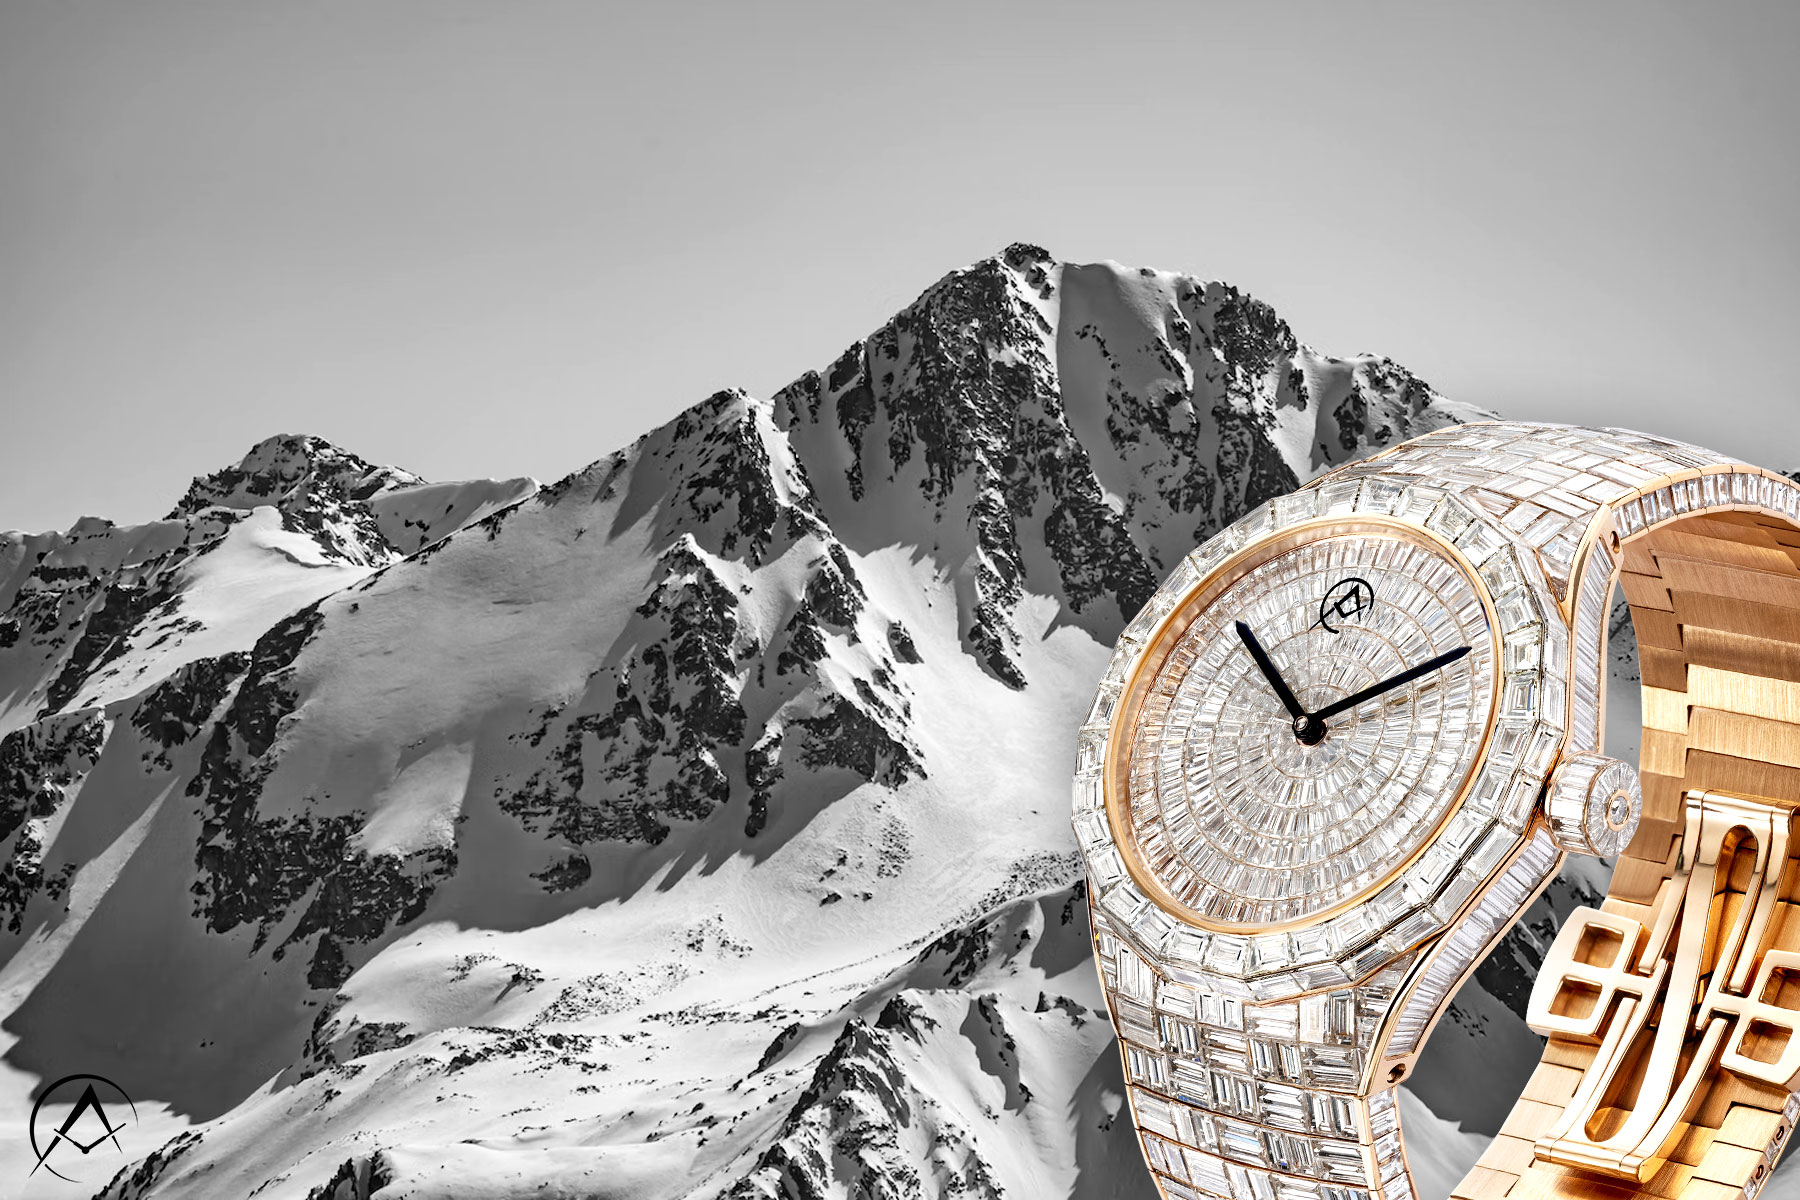 The Snowy Mountains of Aspen, Colorado with a Limited Edition Avi & Co. 18K Rose Gold Timepiece Displayed in the Corner.